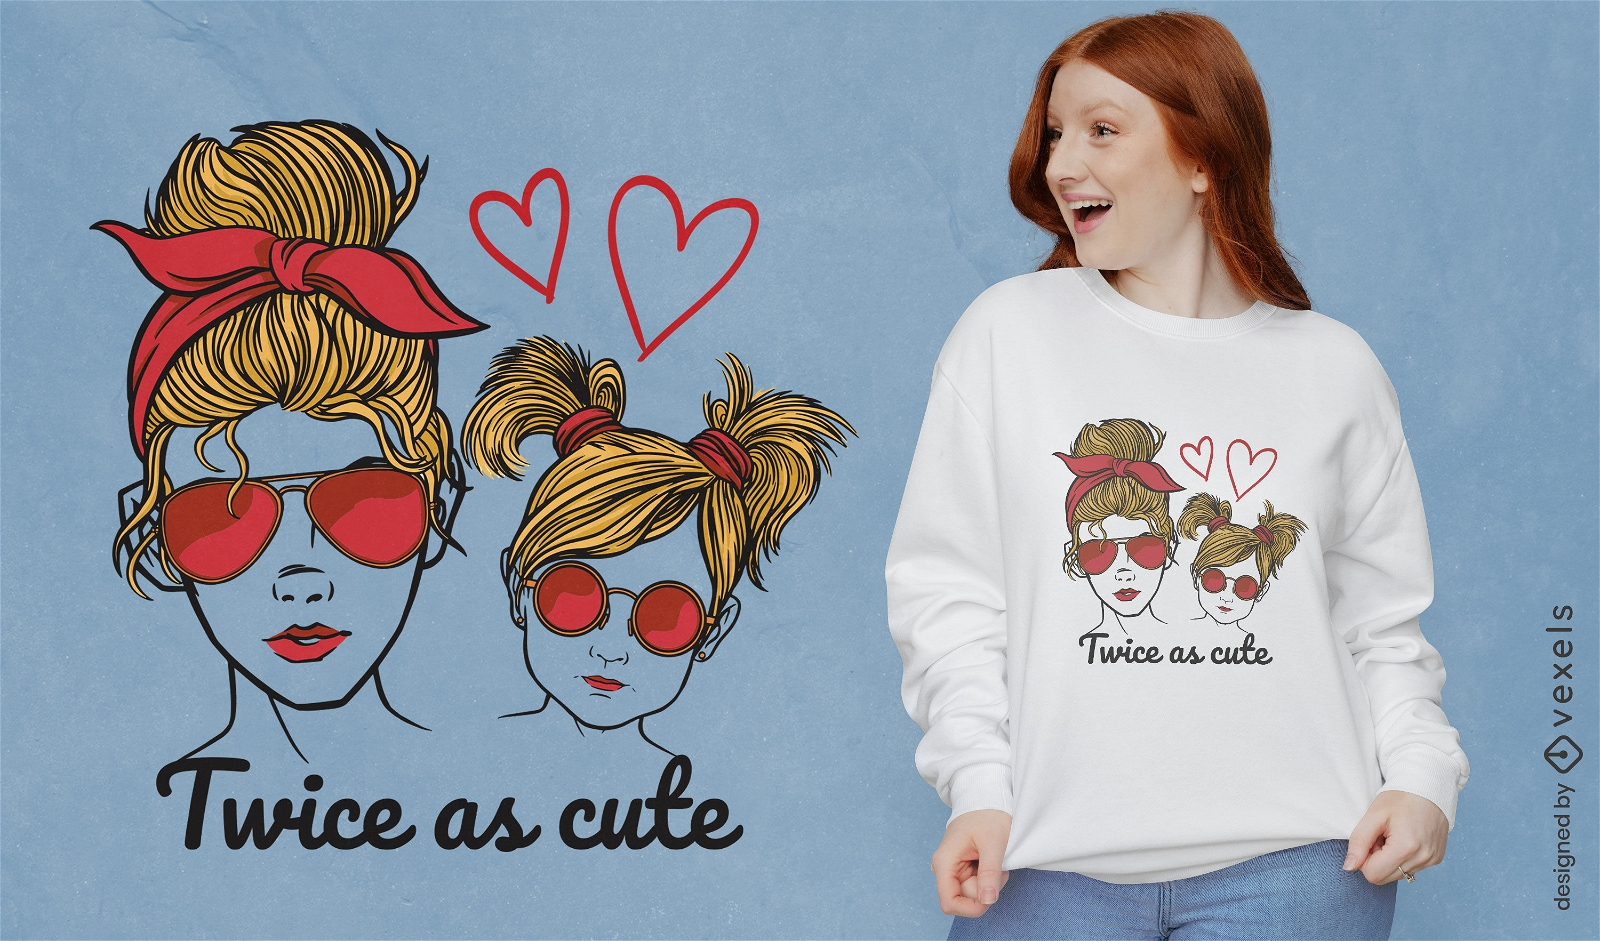 Twice as cute mother daughter t-shirt design